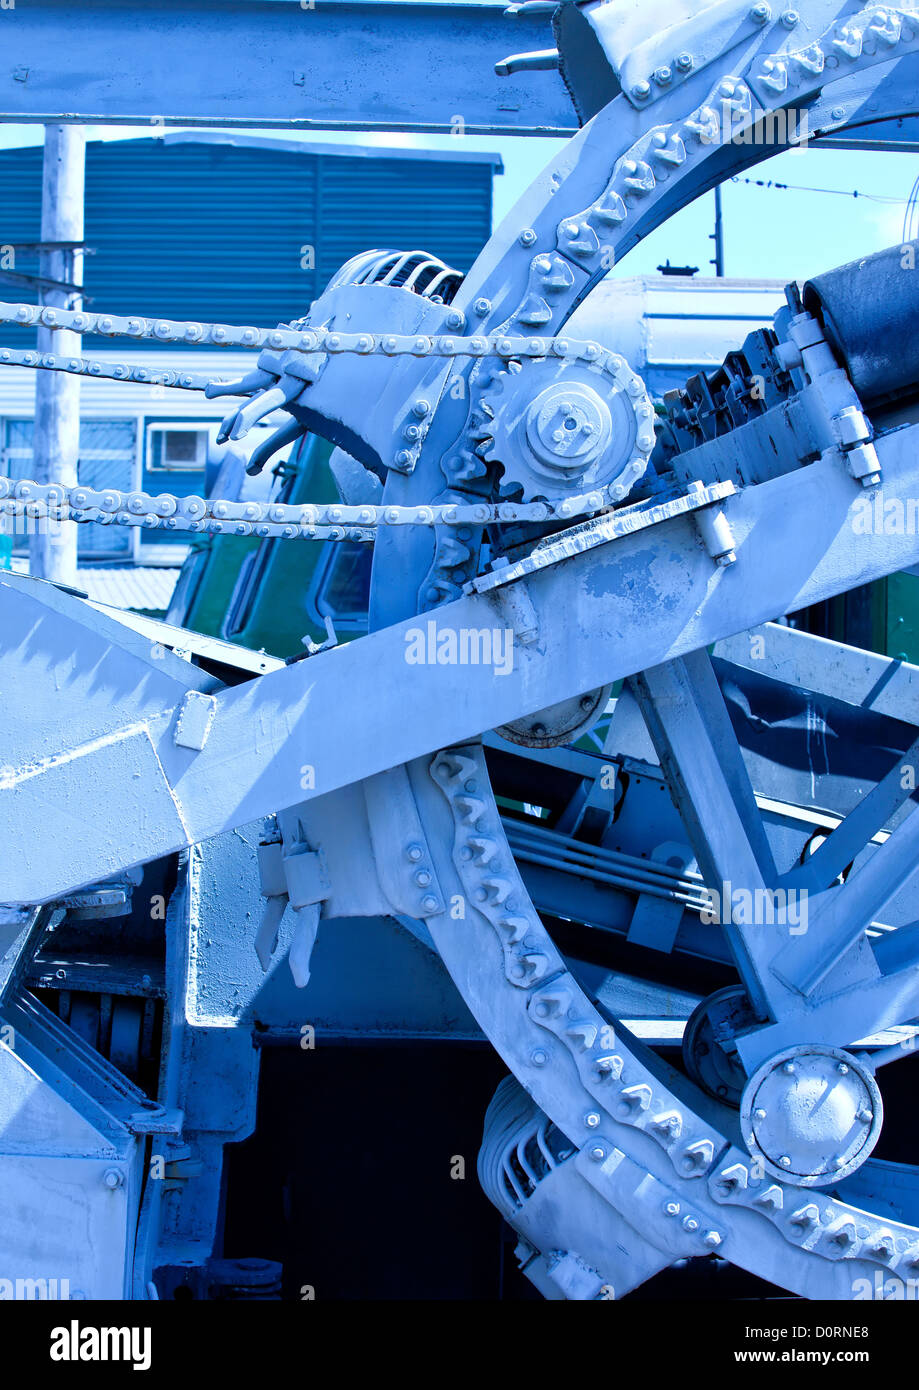 mechanism with a chain drive Stock Photo